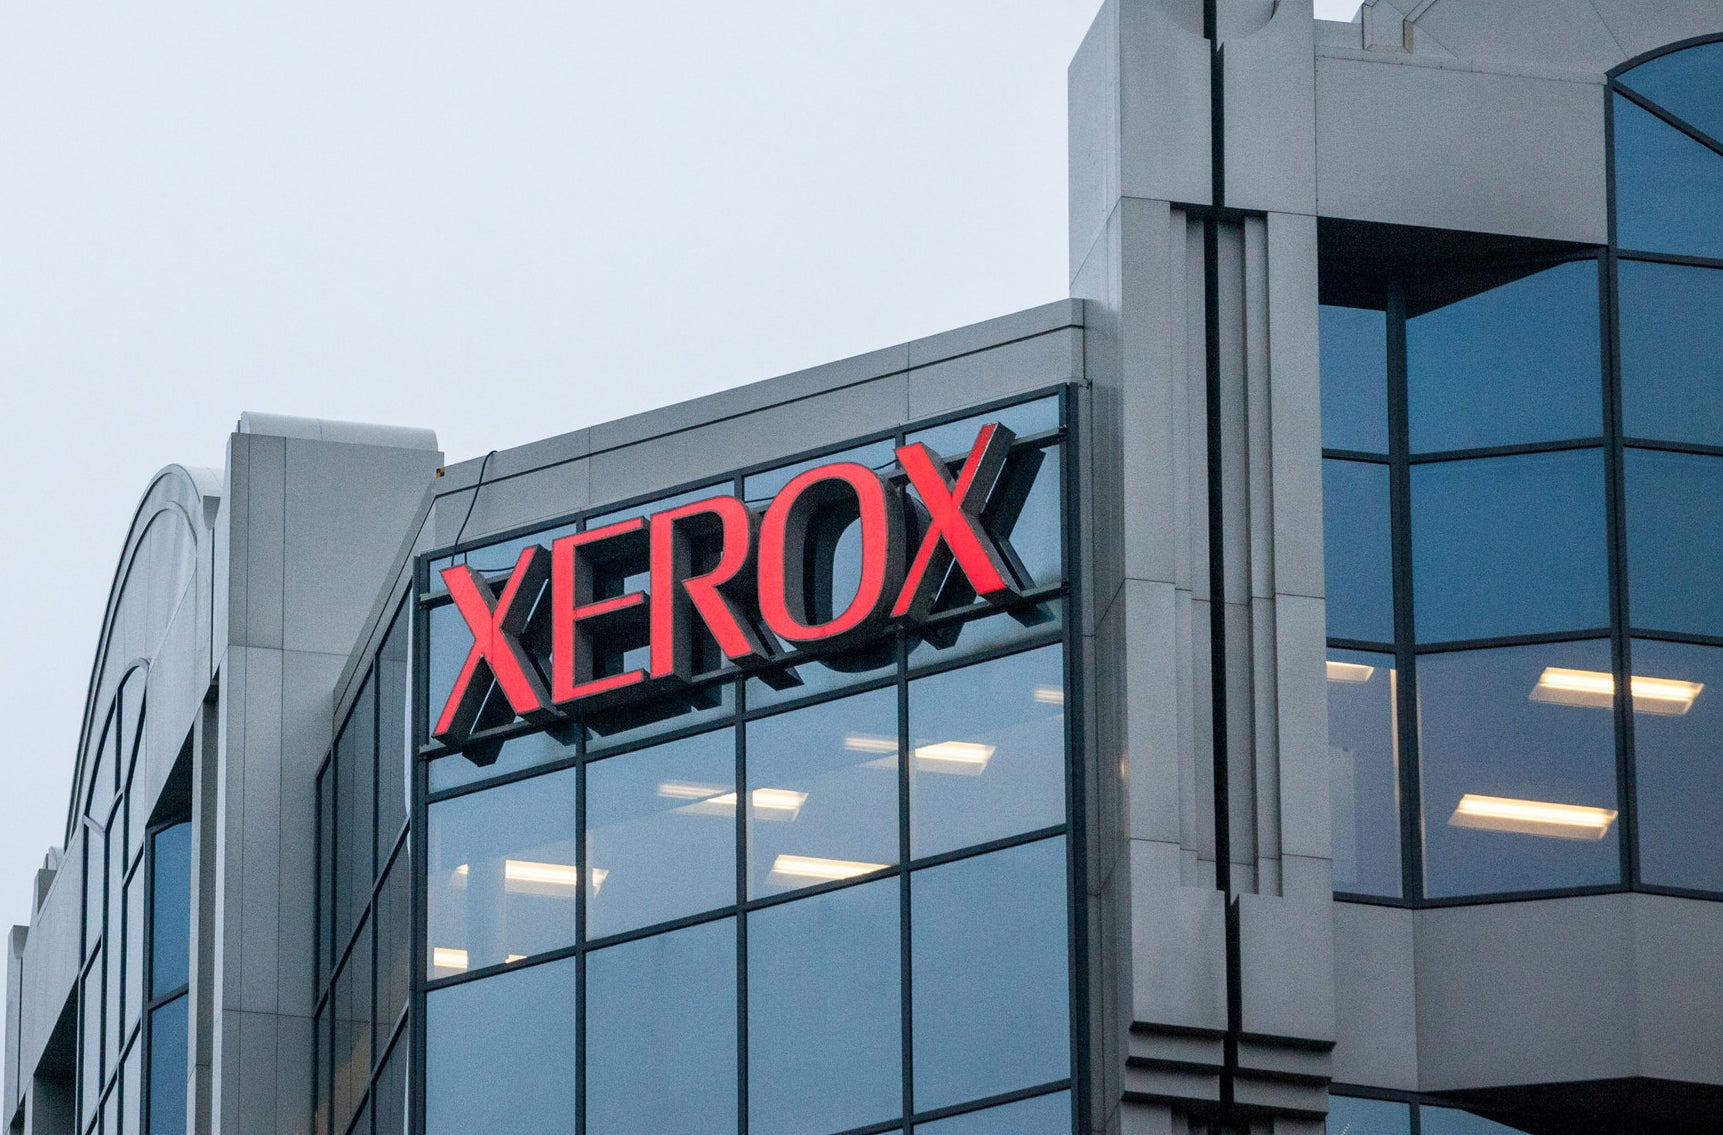 A Xerox corporate office building